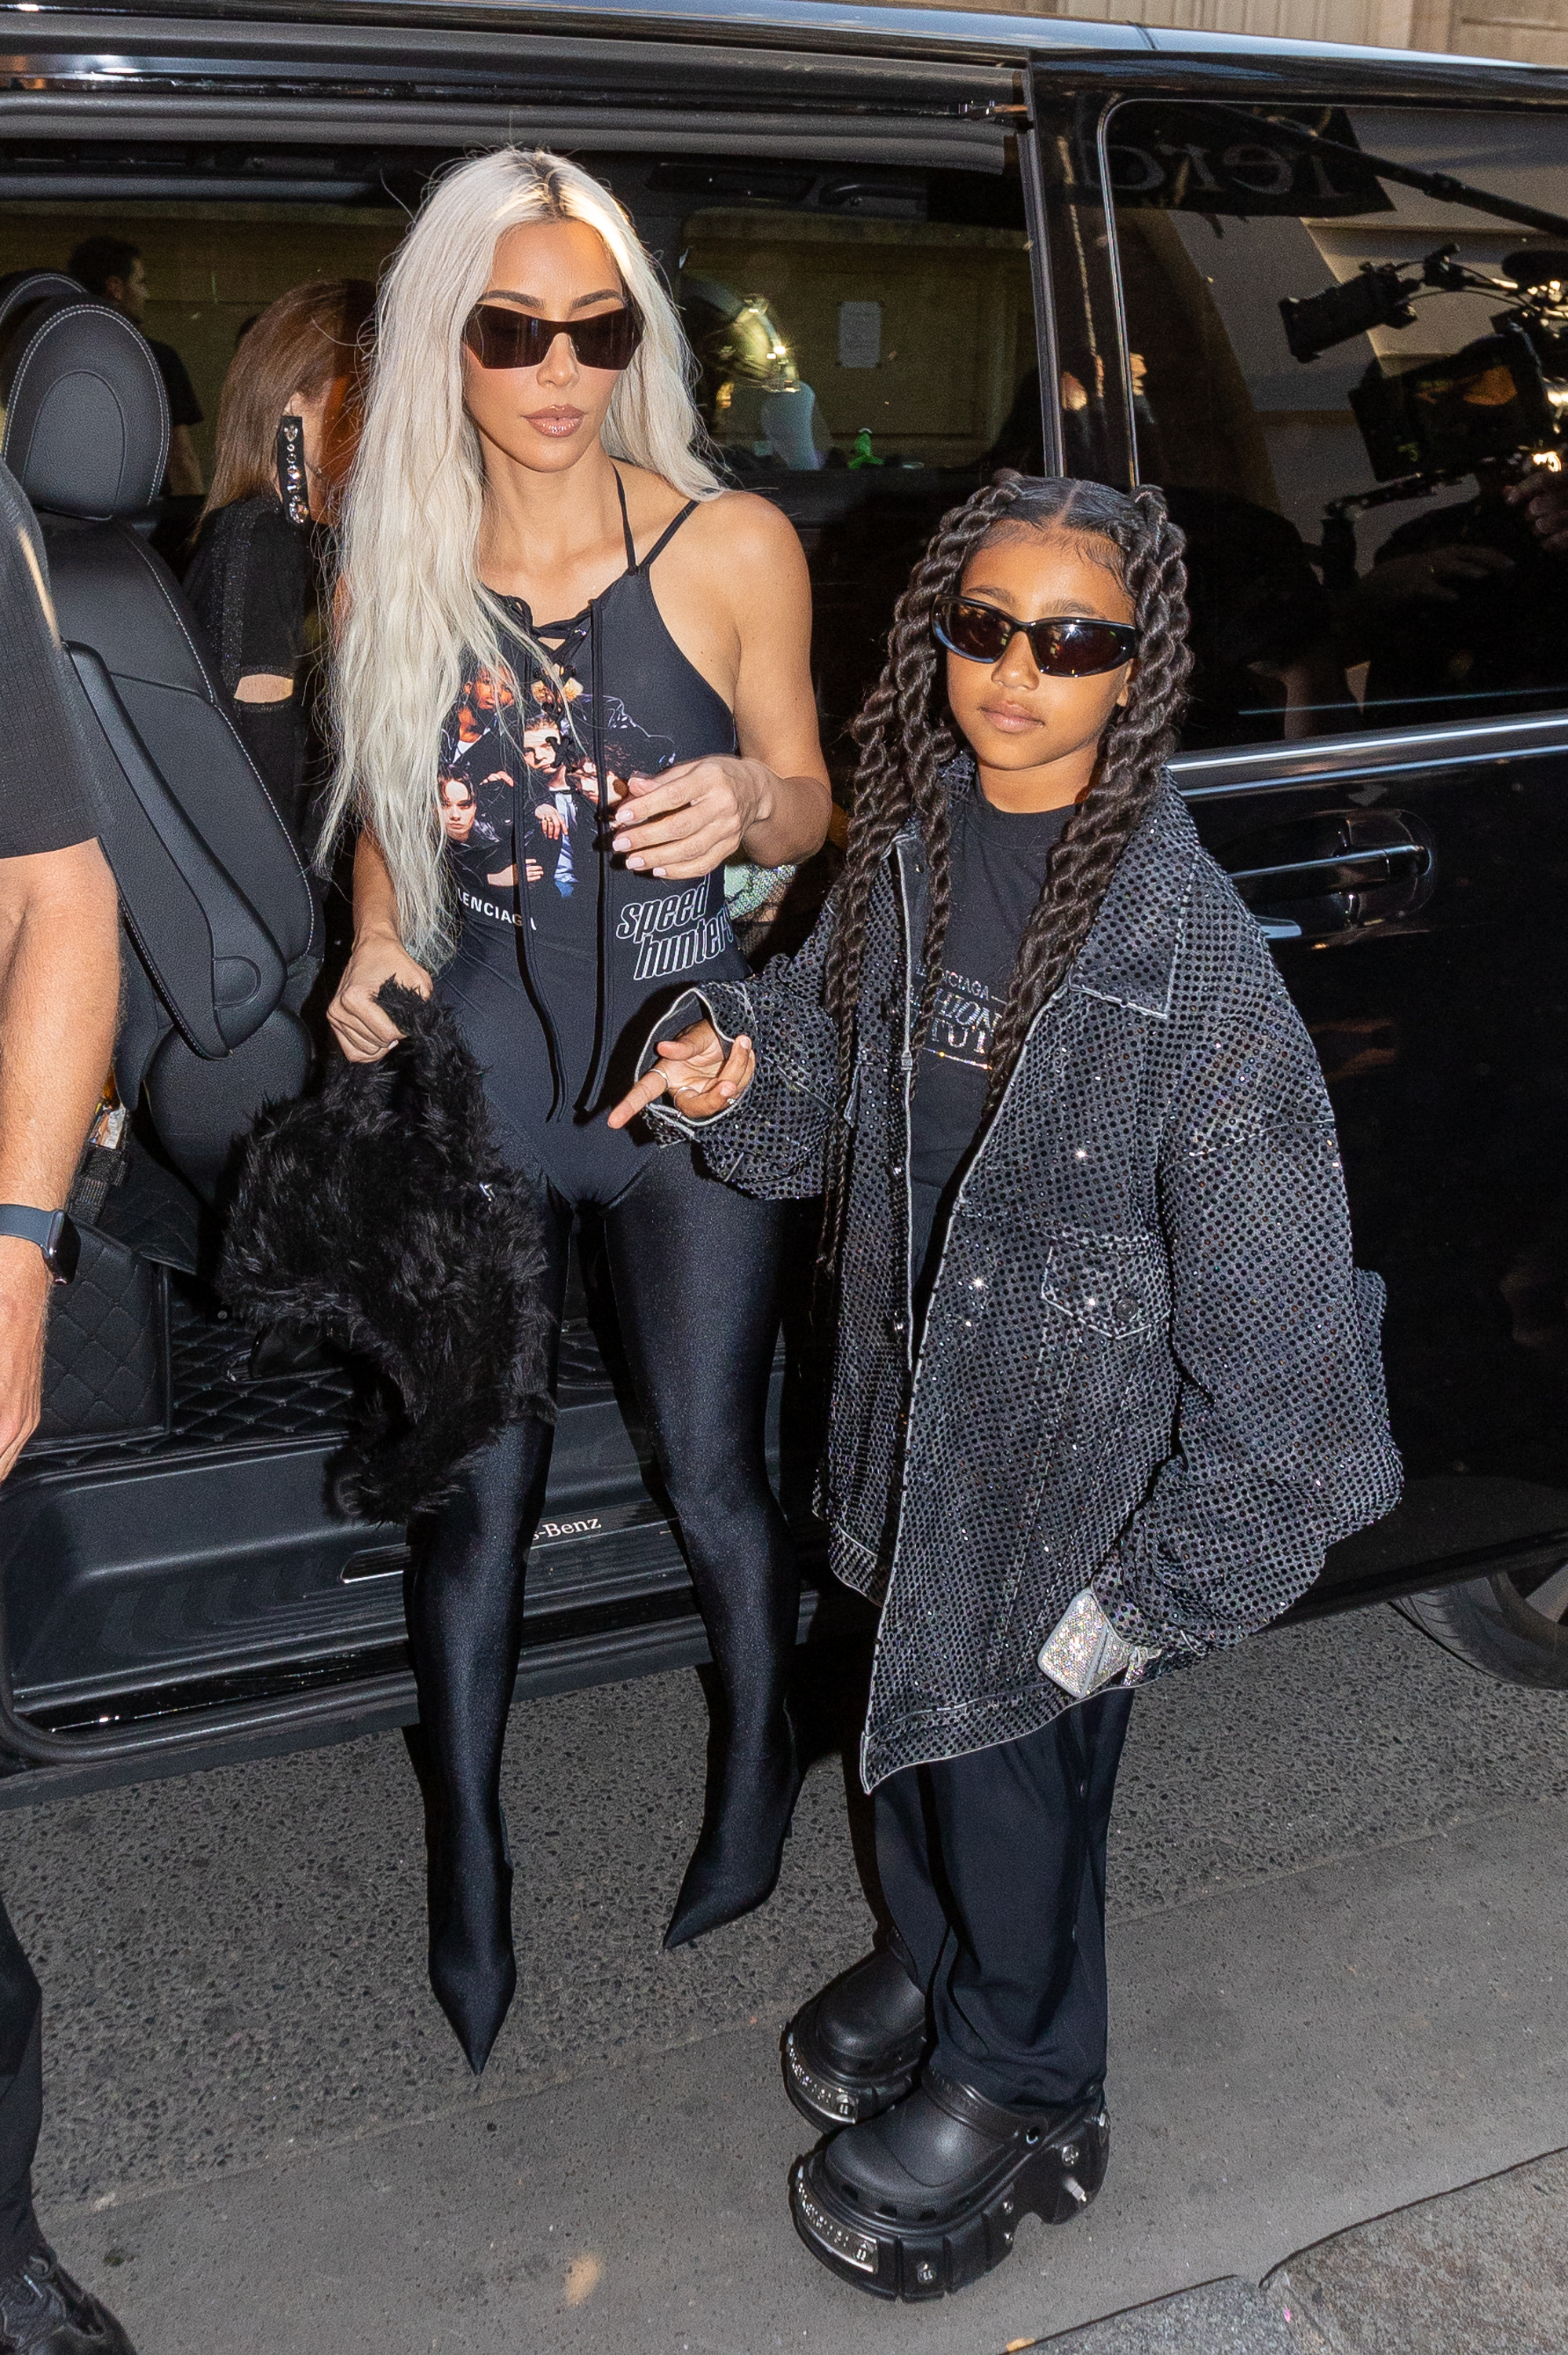 Close-up of North and Kim on the street in sunglasses by a car